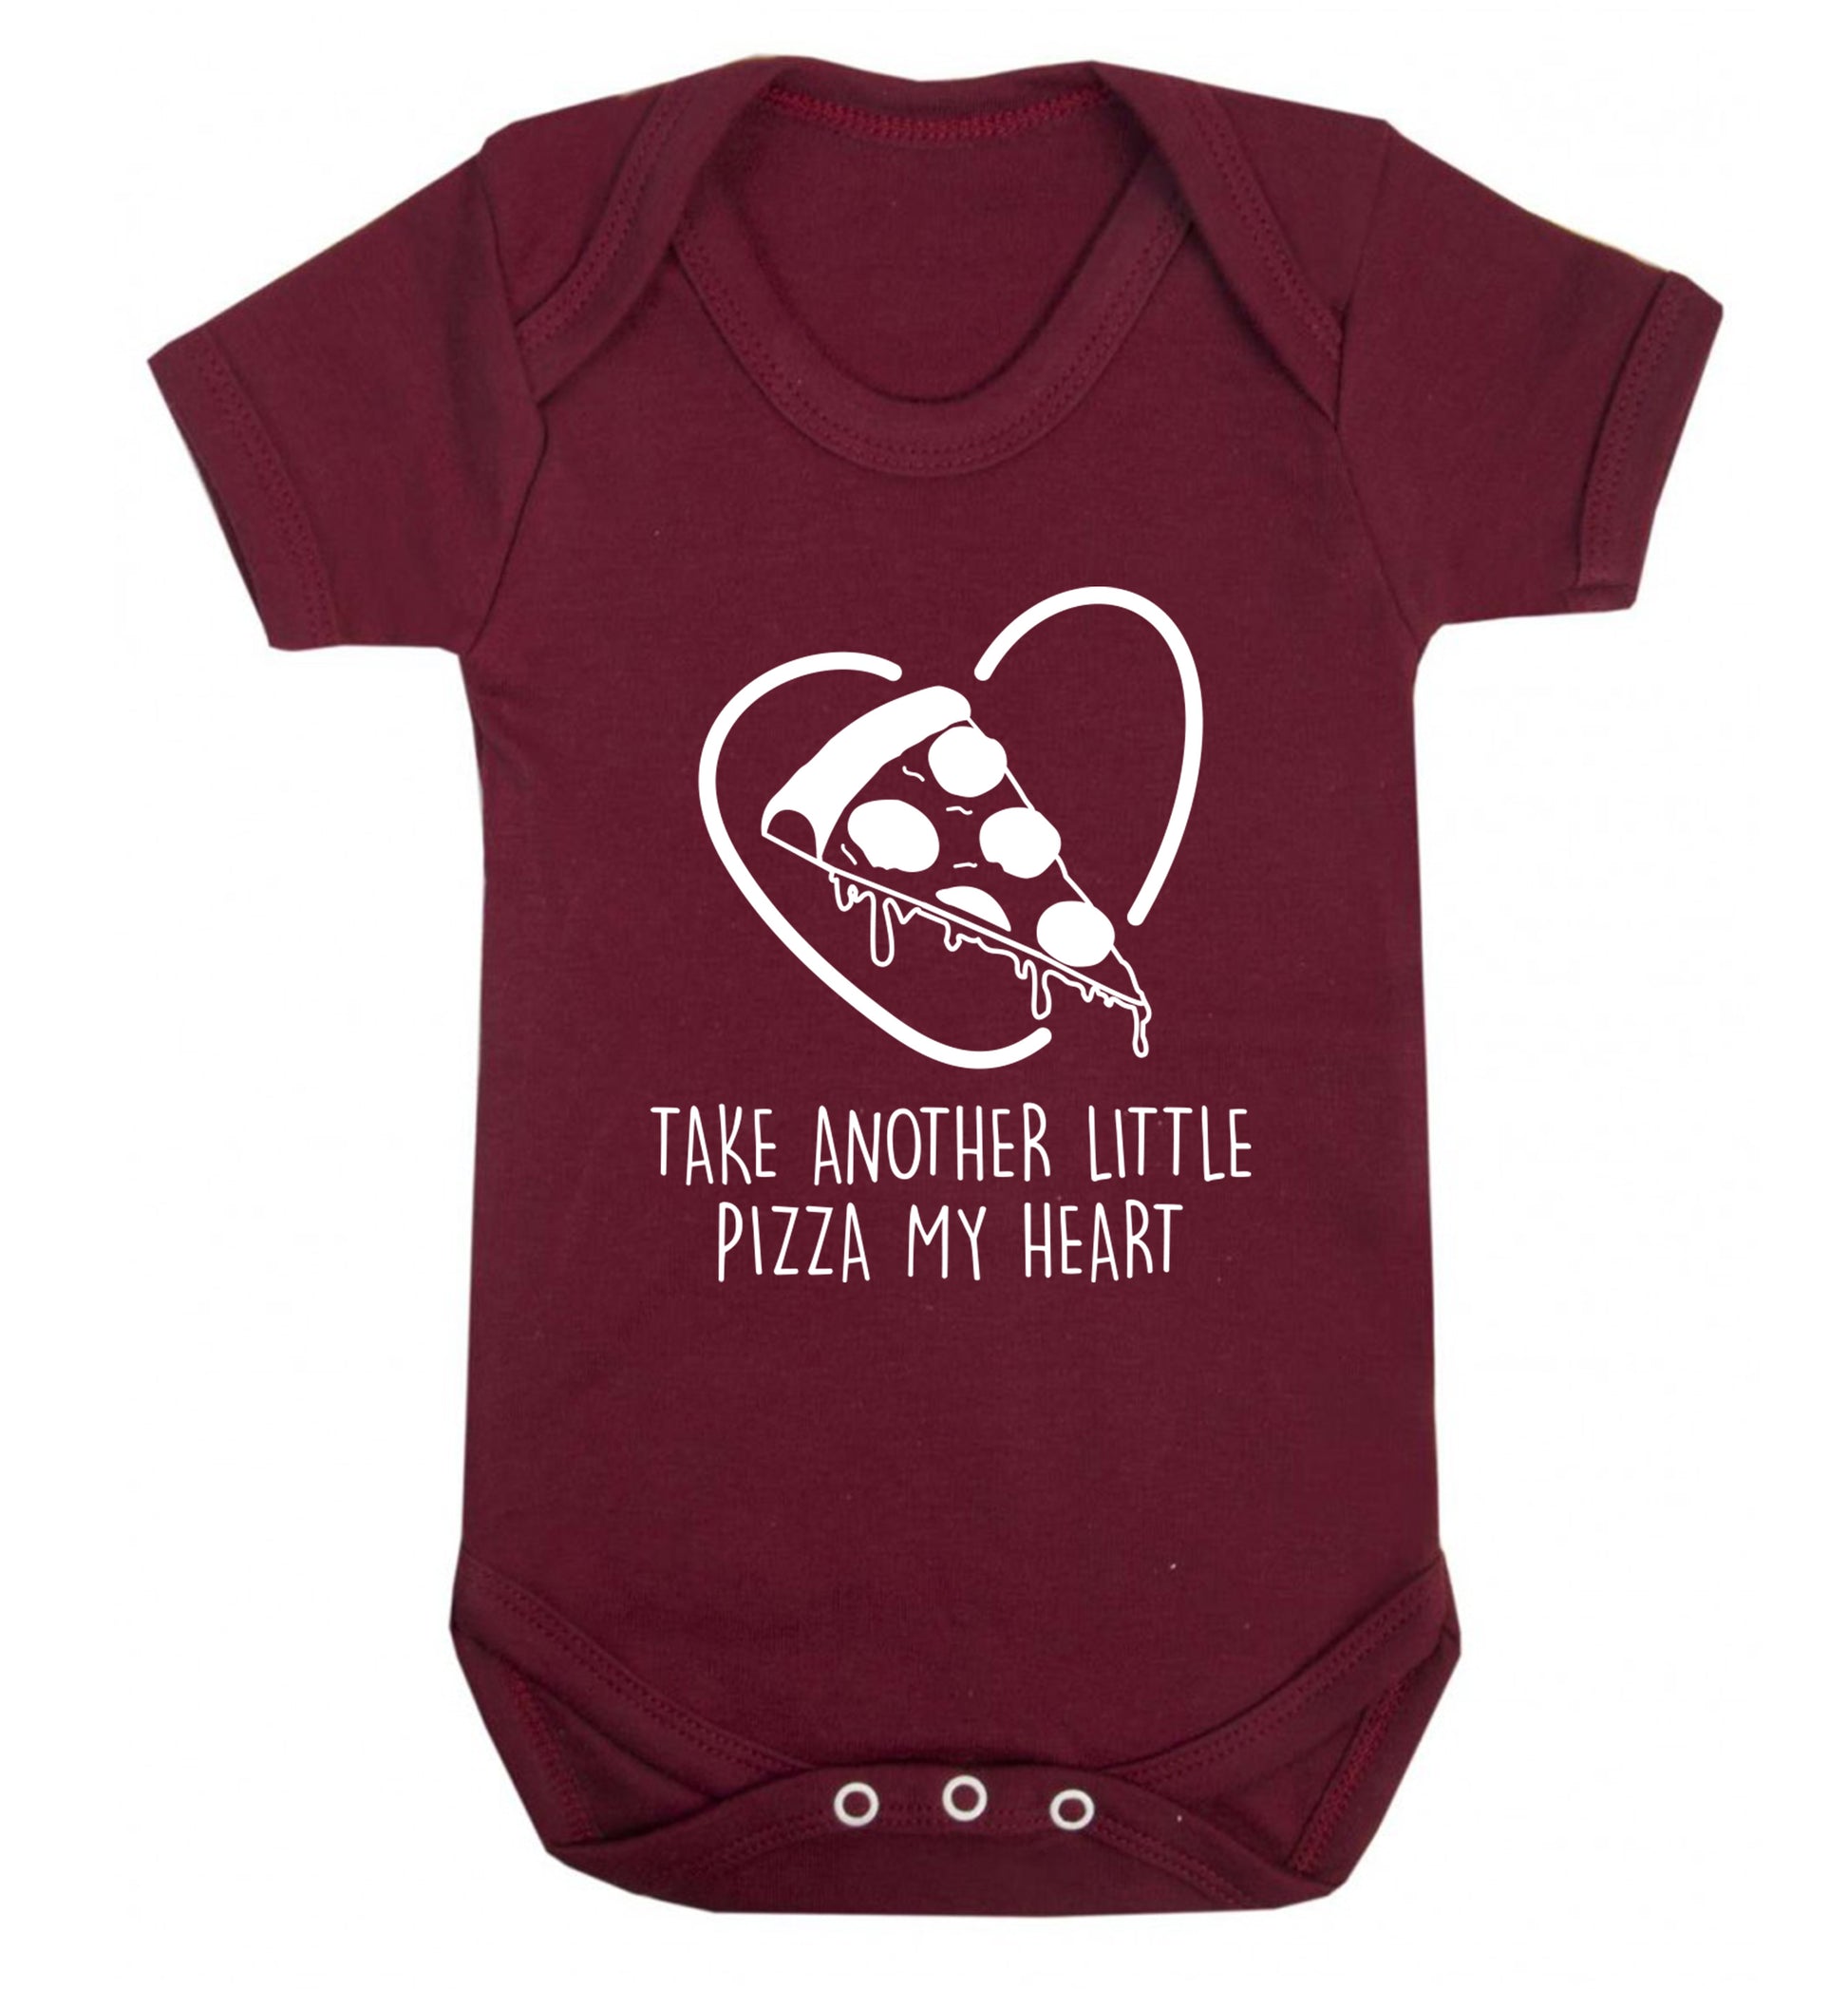 Take another little pizza my heart Baby Vest maroon 18-24 months